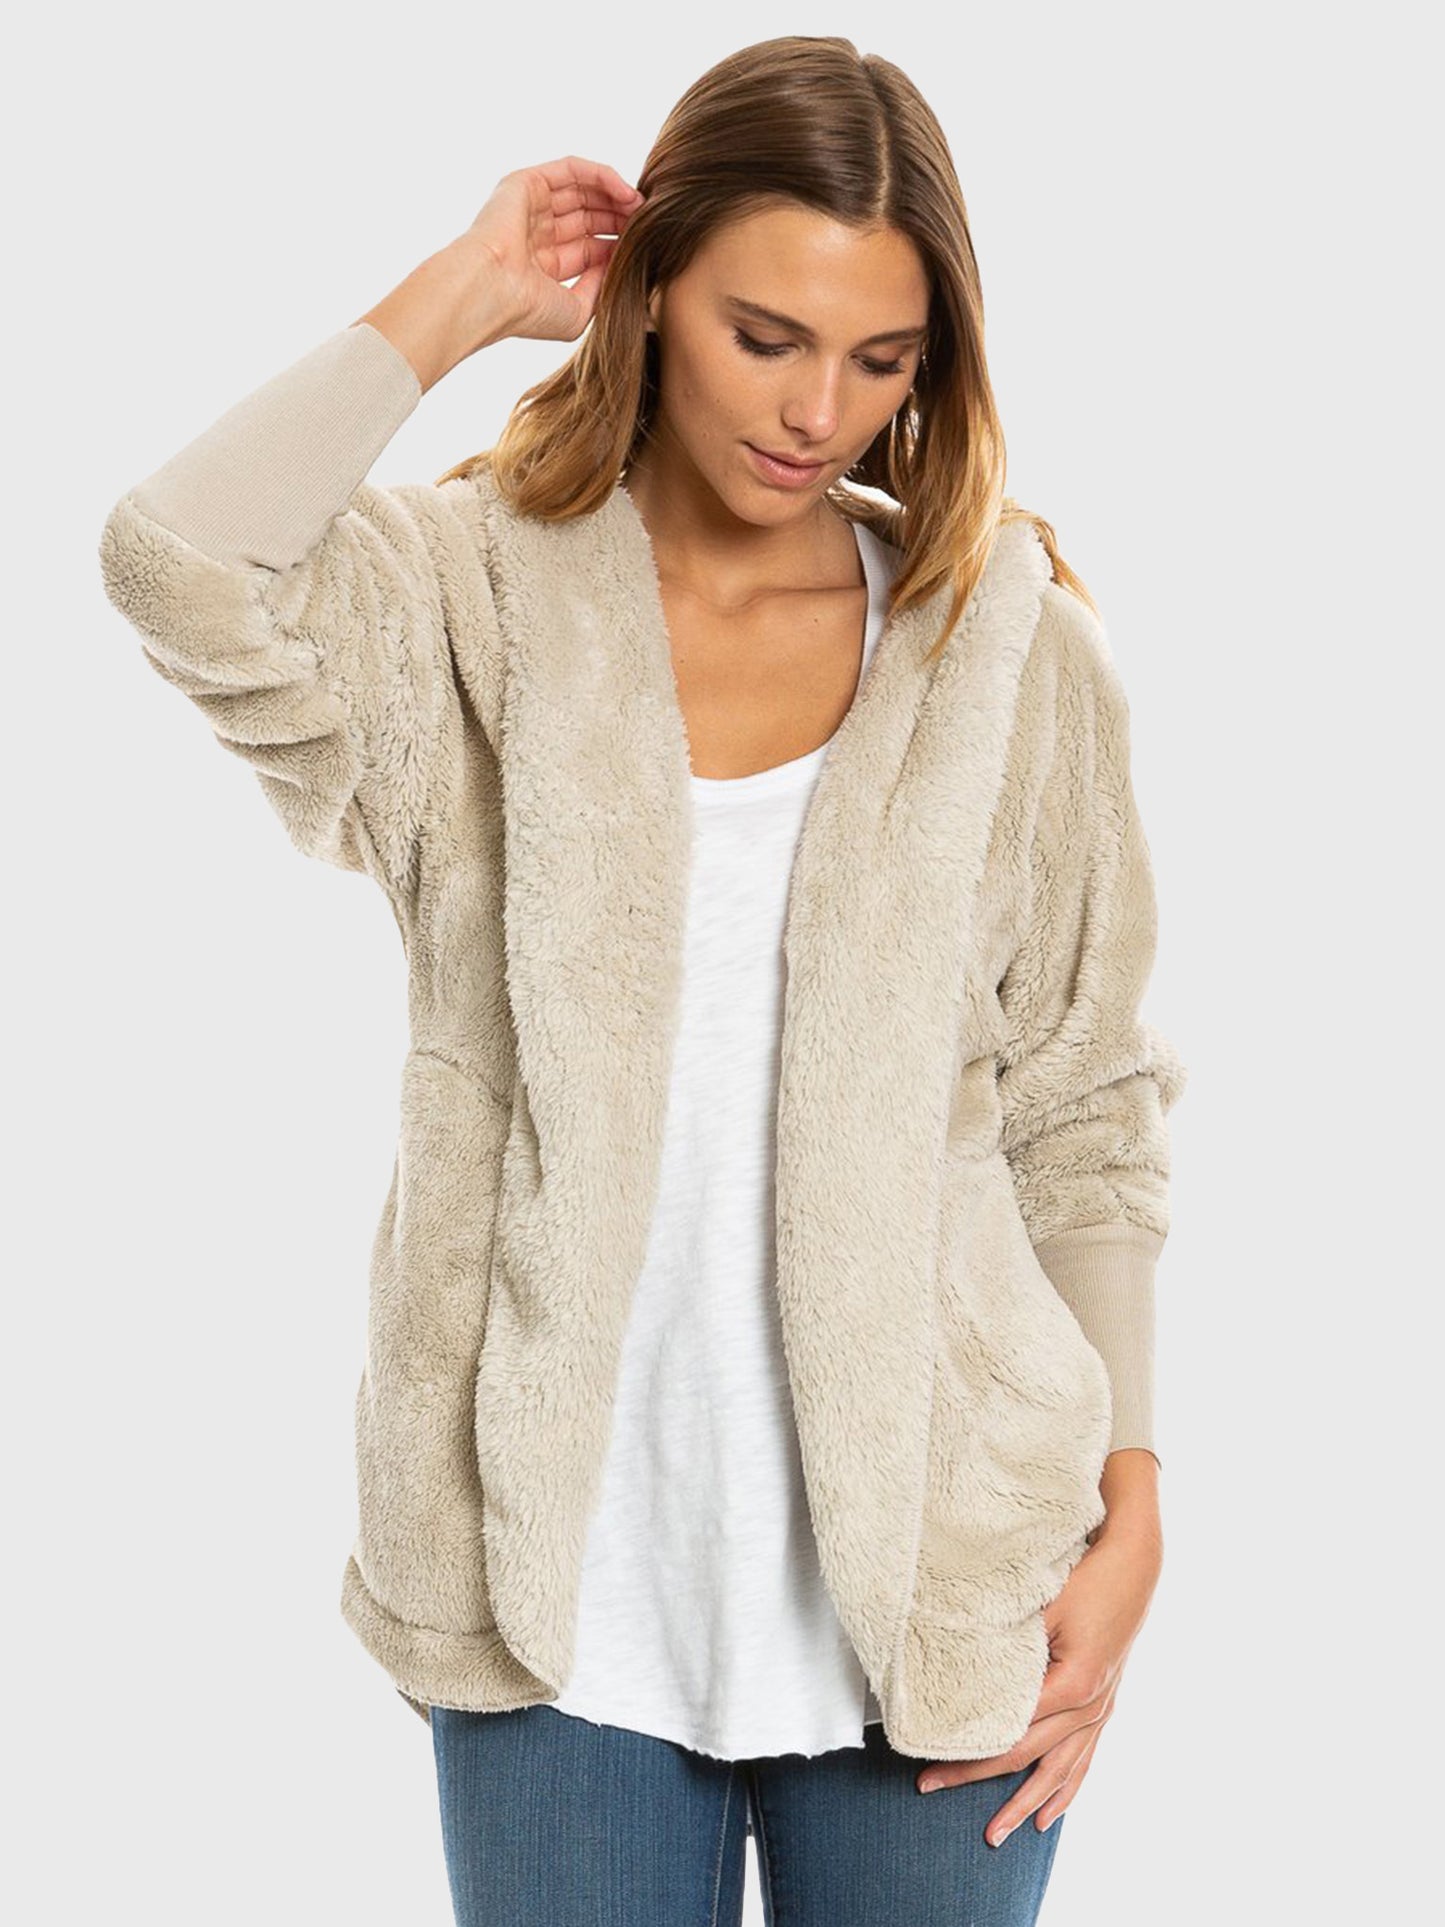 Dylan Women's Over-Sized Cozy Jacket